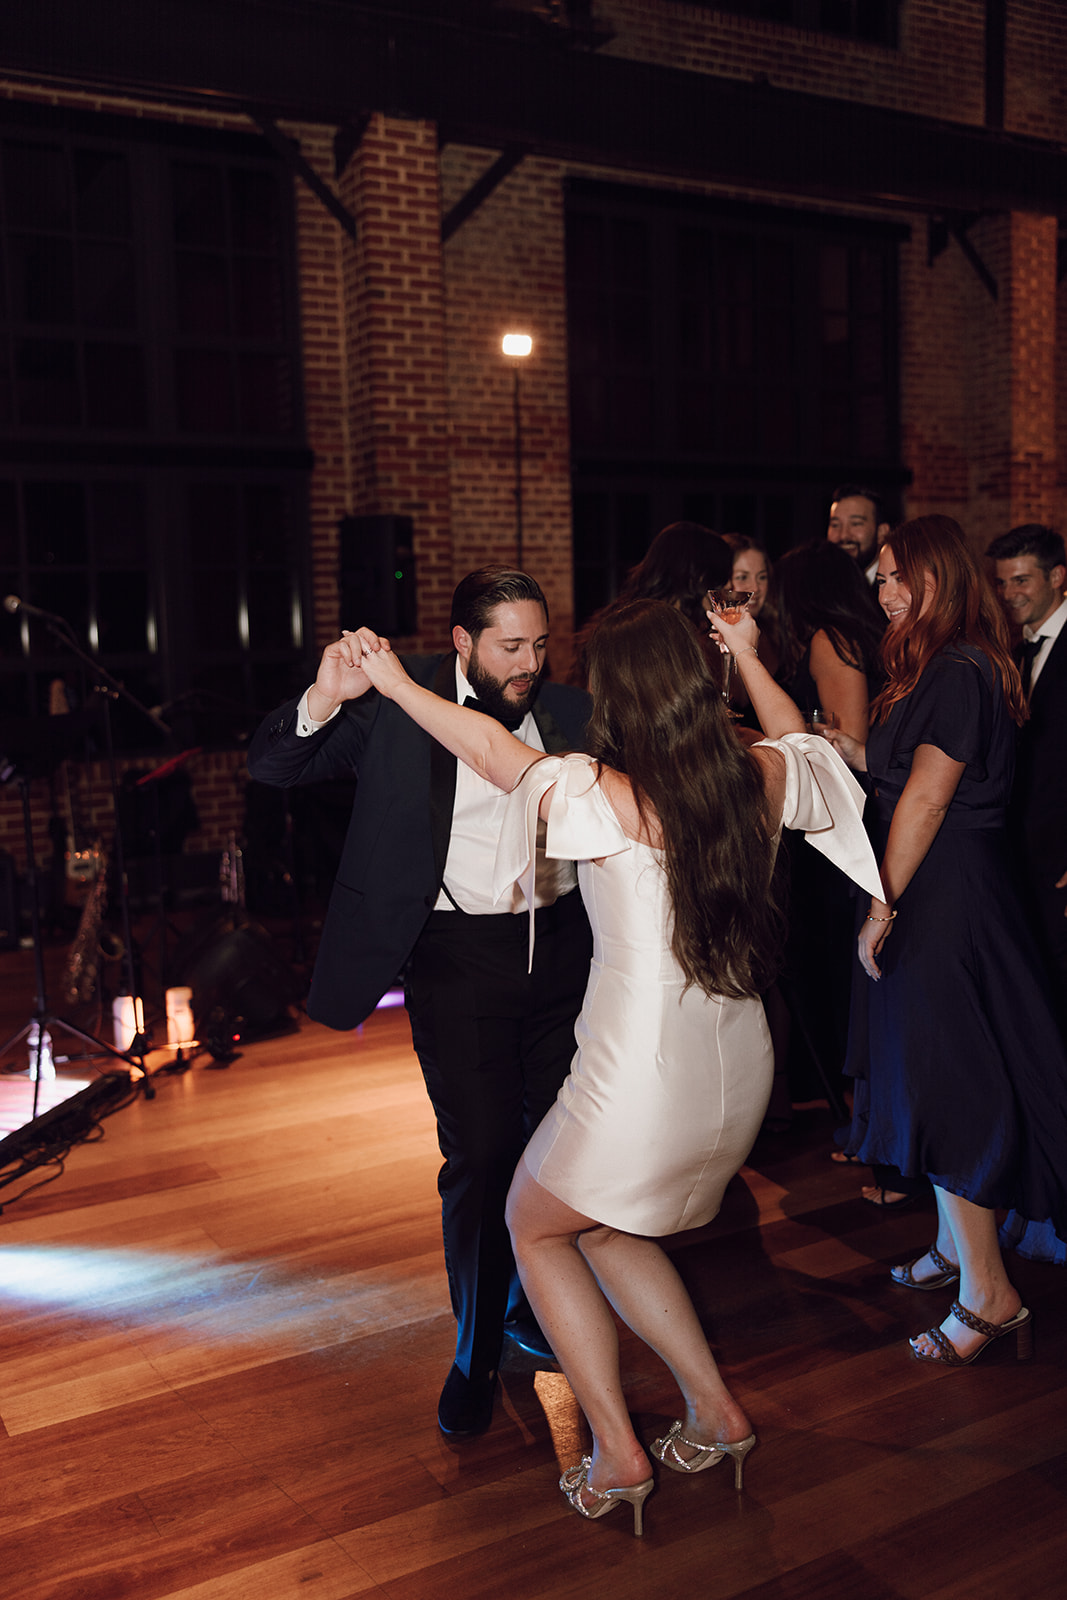 the bride and groom dancing on the dance floor captured by the wedding photographer in Washington DC